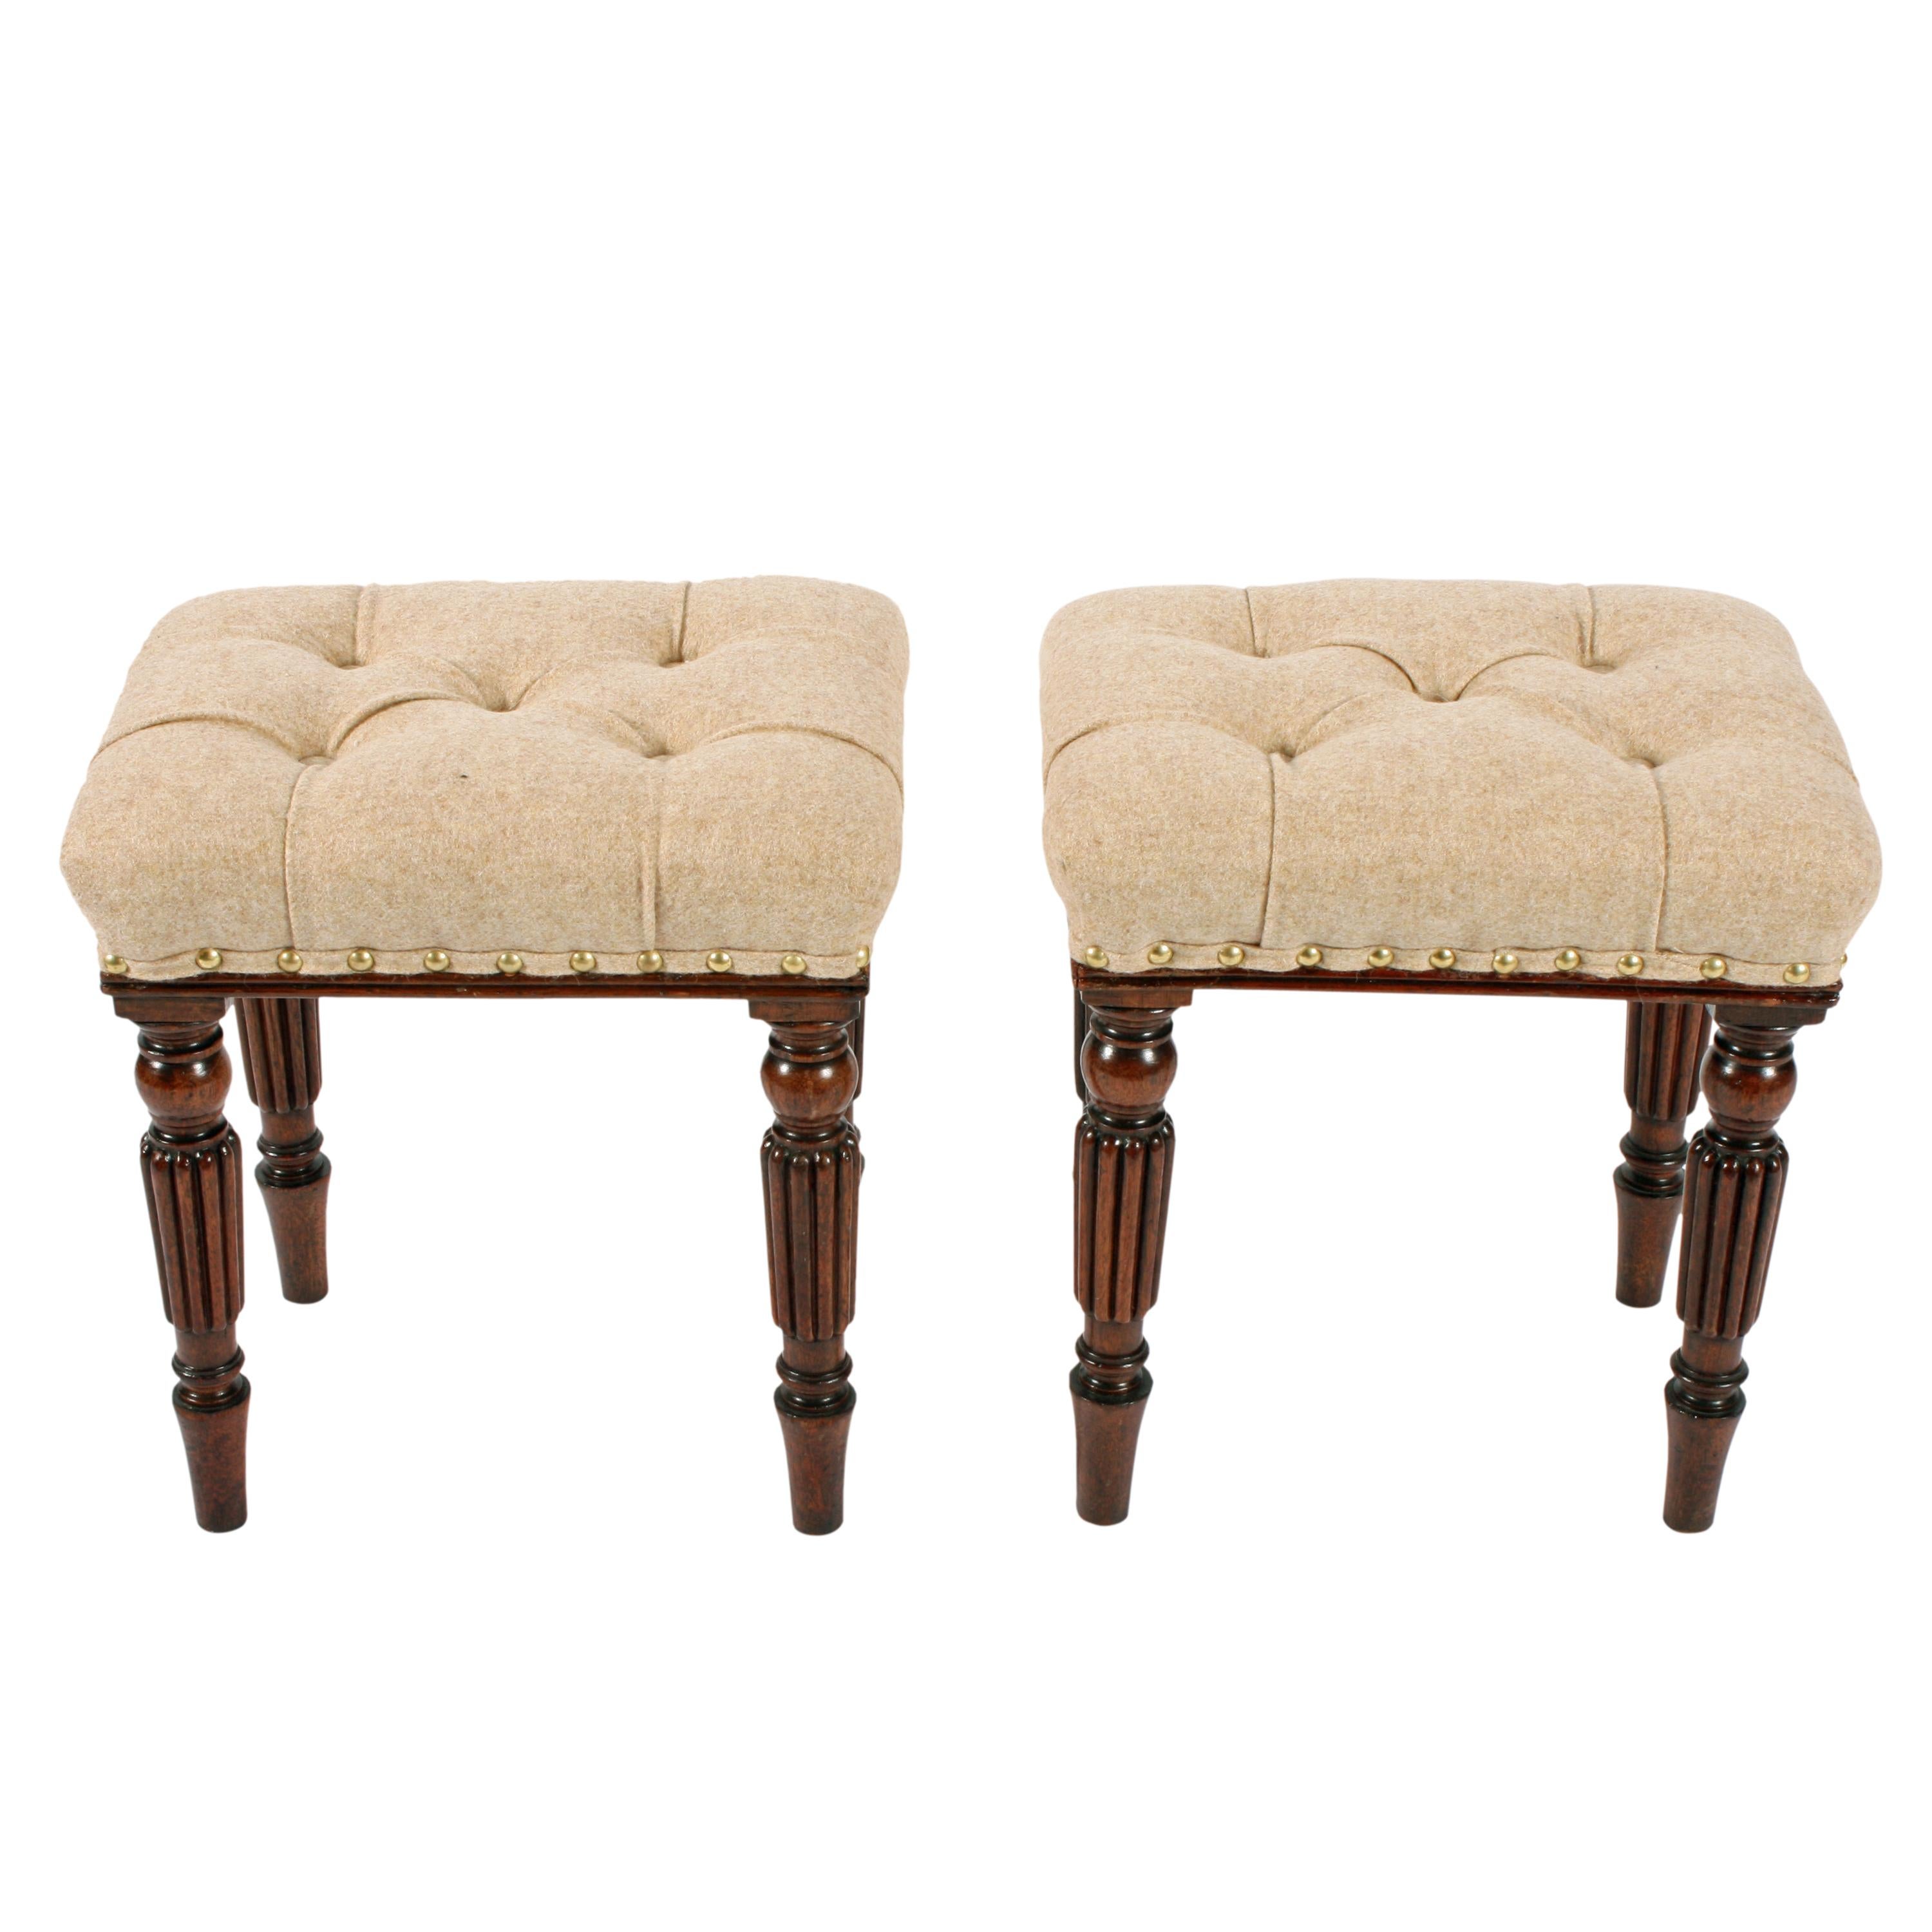 Pair of Georgian 'Gillows' design stools


A pair of Georgian mahogany stools.

The stools have turned and reeded legs in the style of 'Gillows of Lancaster'.

The oblong shaped stools have recently been re-upholstered and have a reeded bead